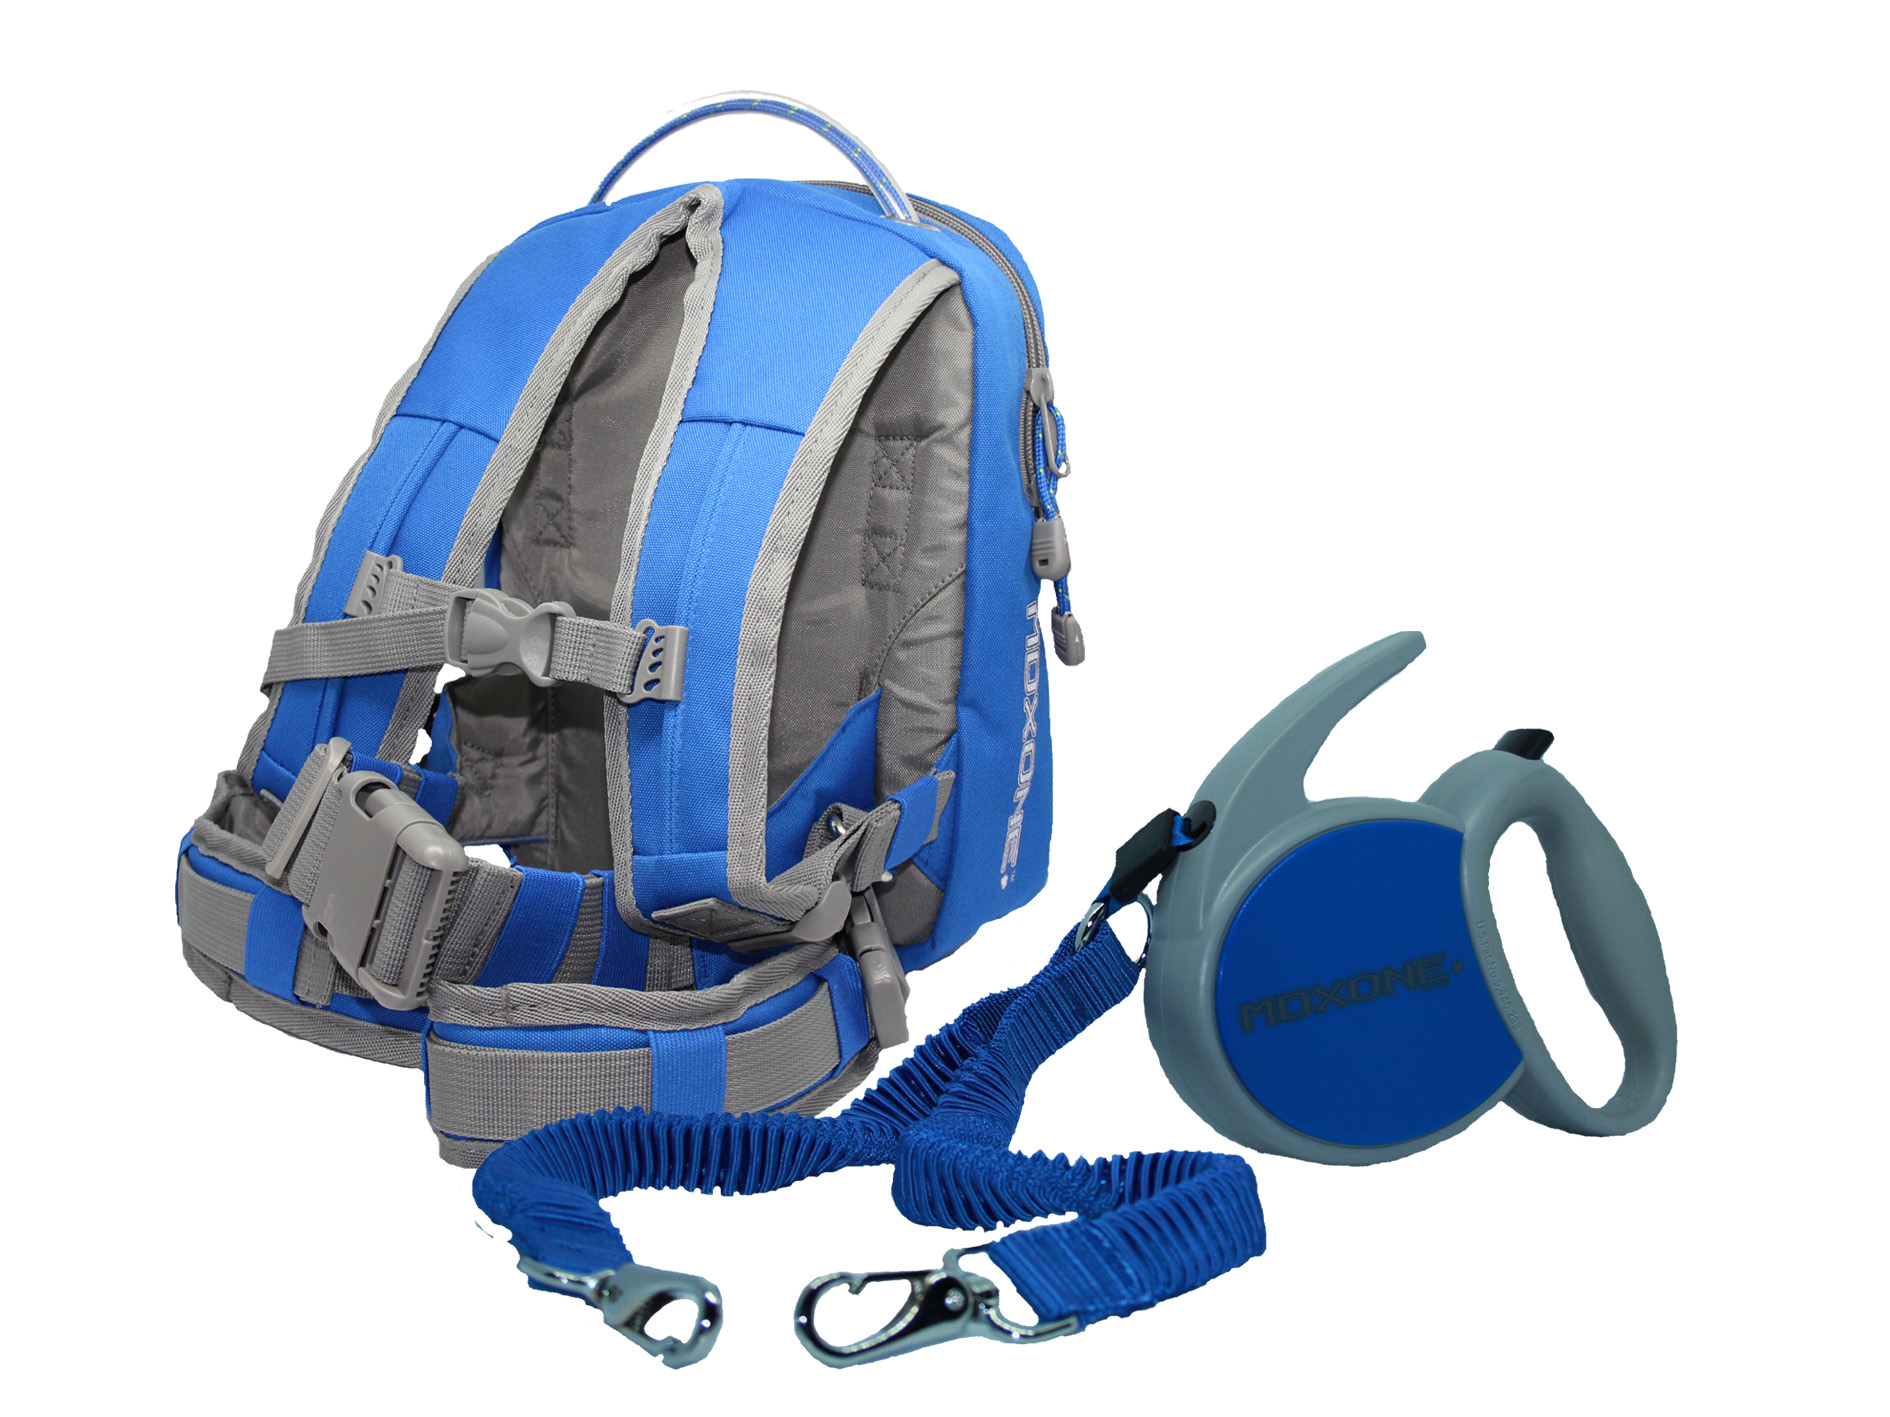 The back pack harness